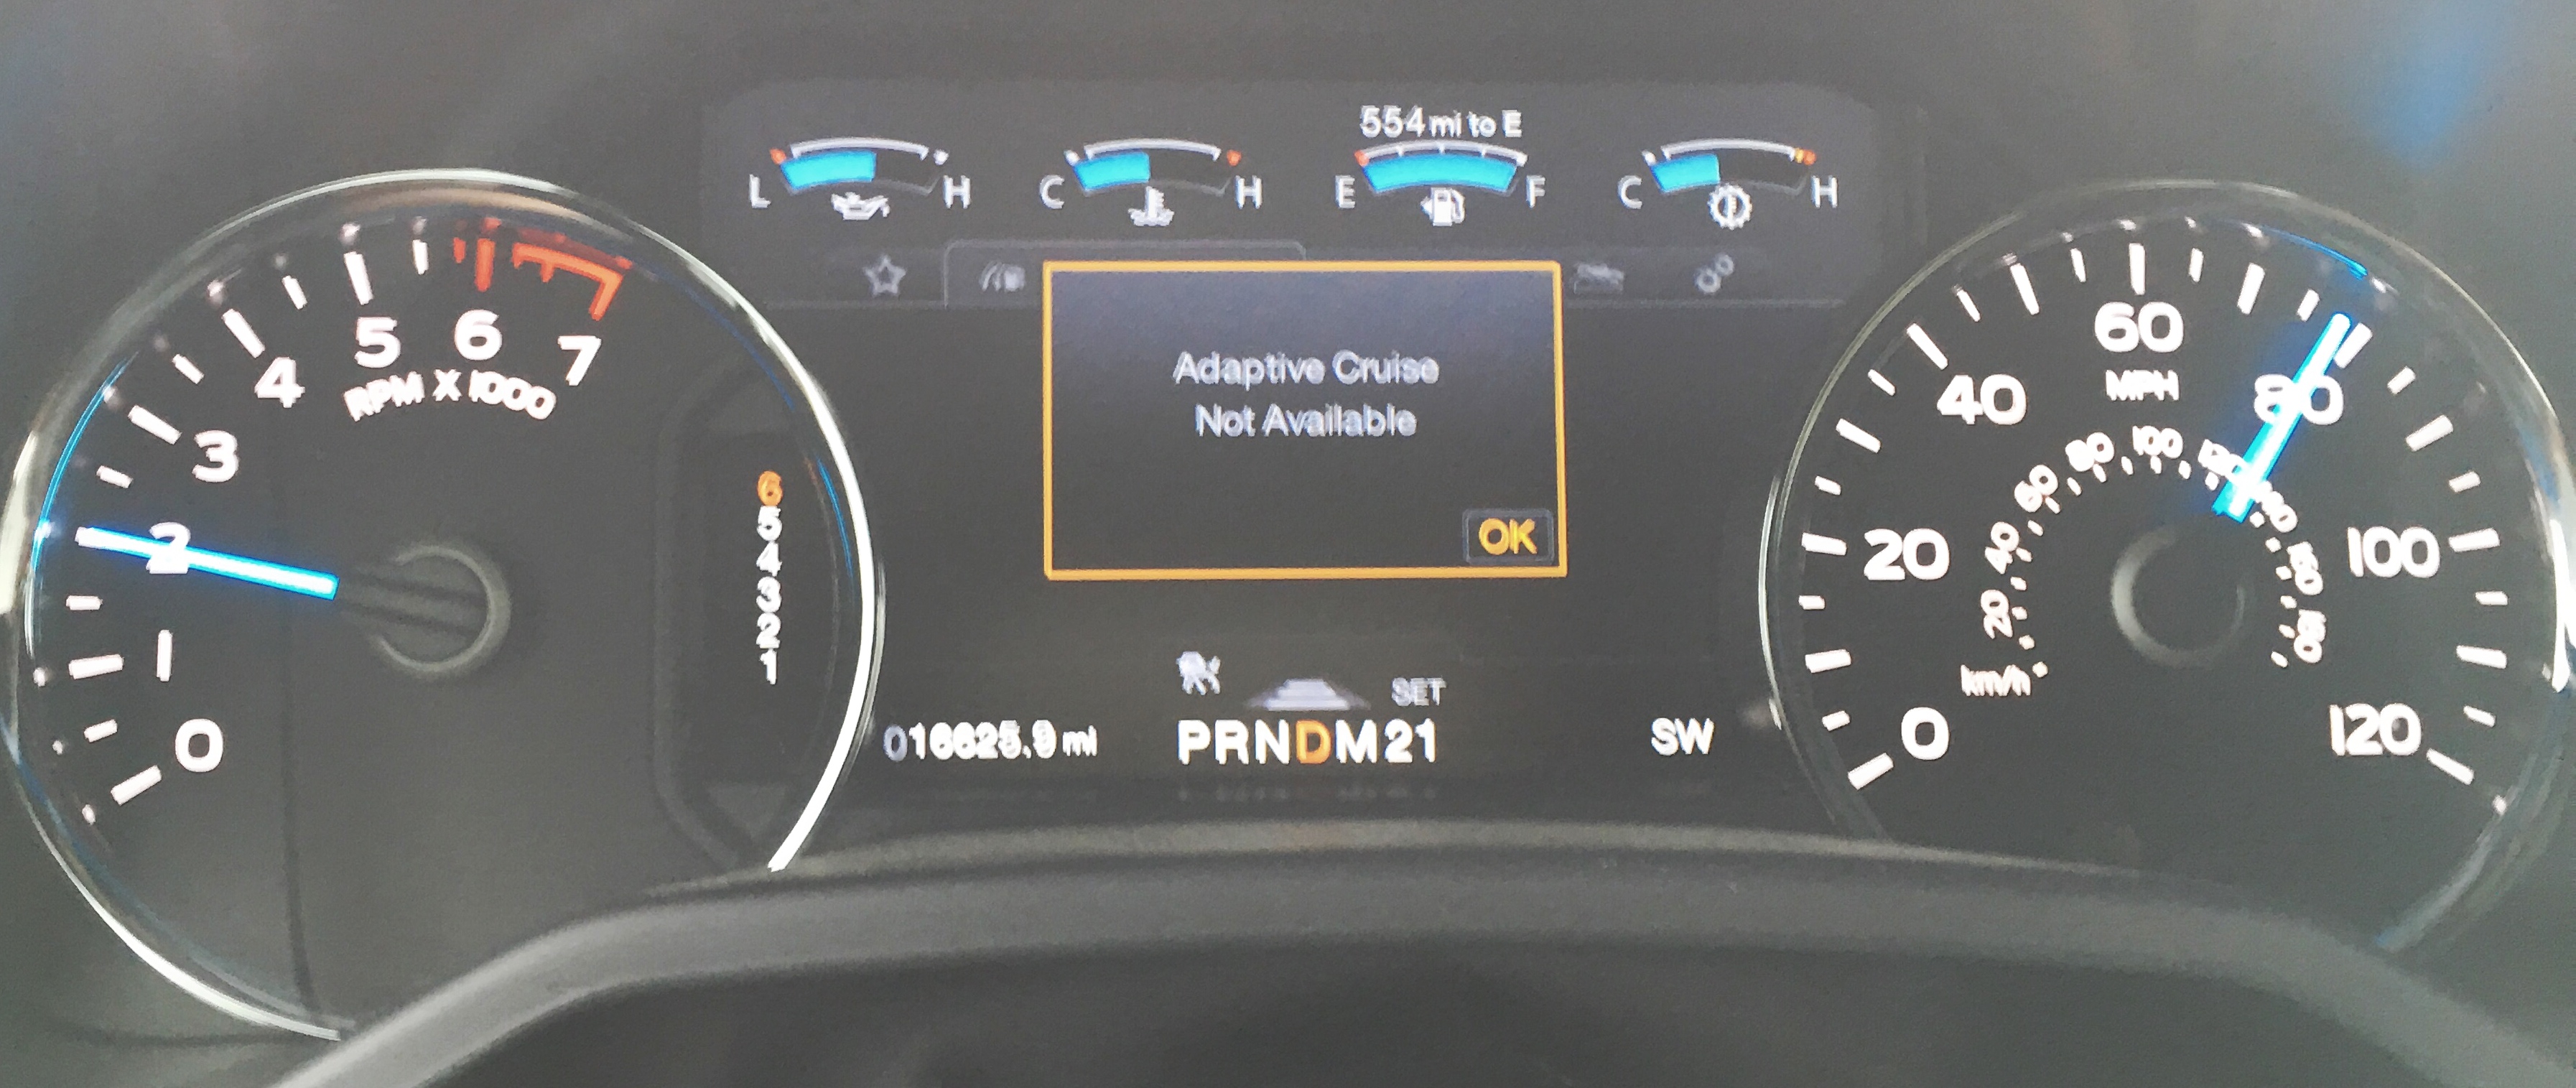 adaptive cruise control unavailable freightliner